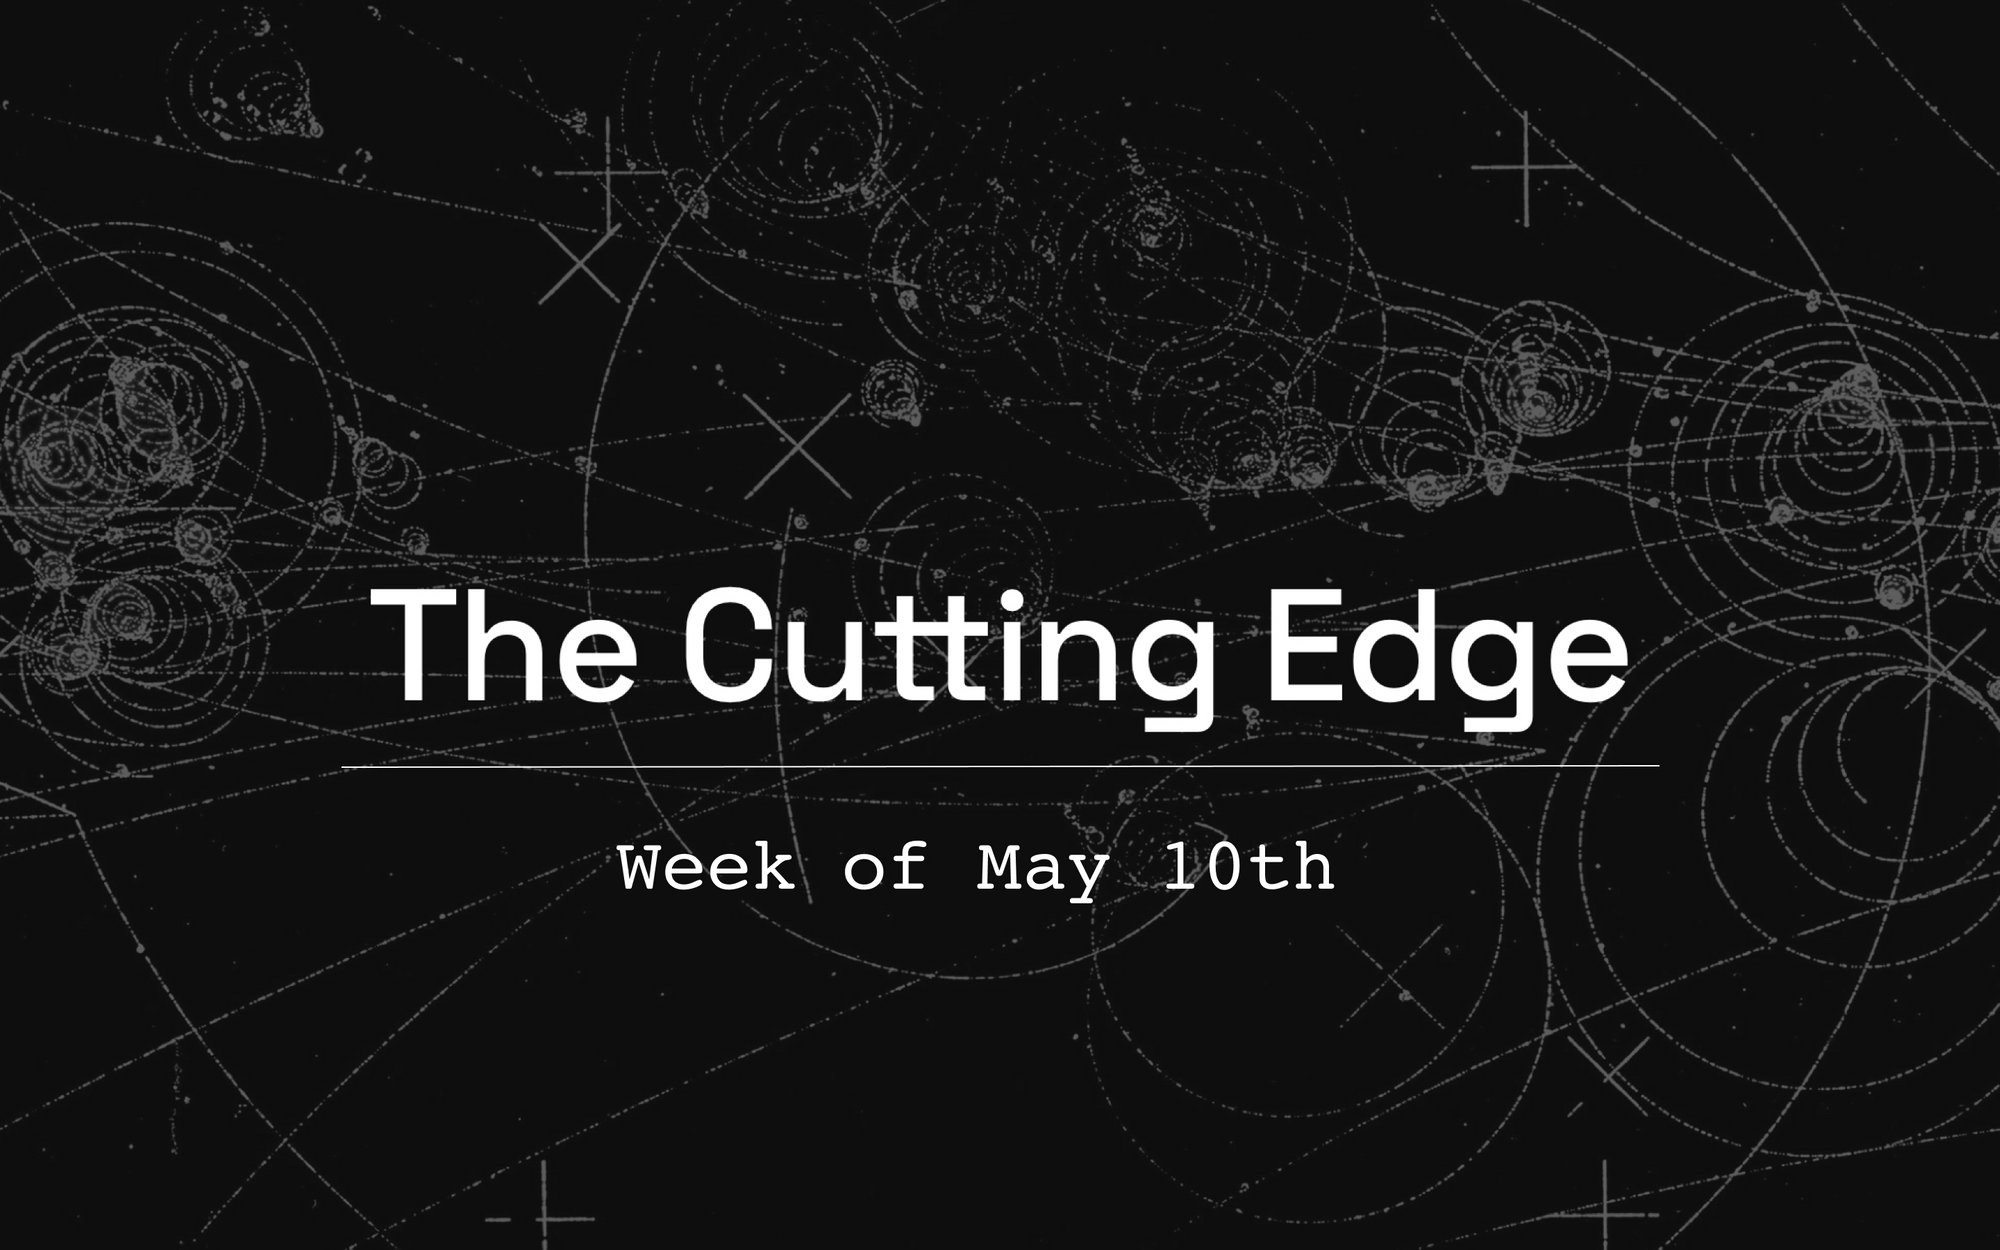 The Cutting EDG: Week of May 10th